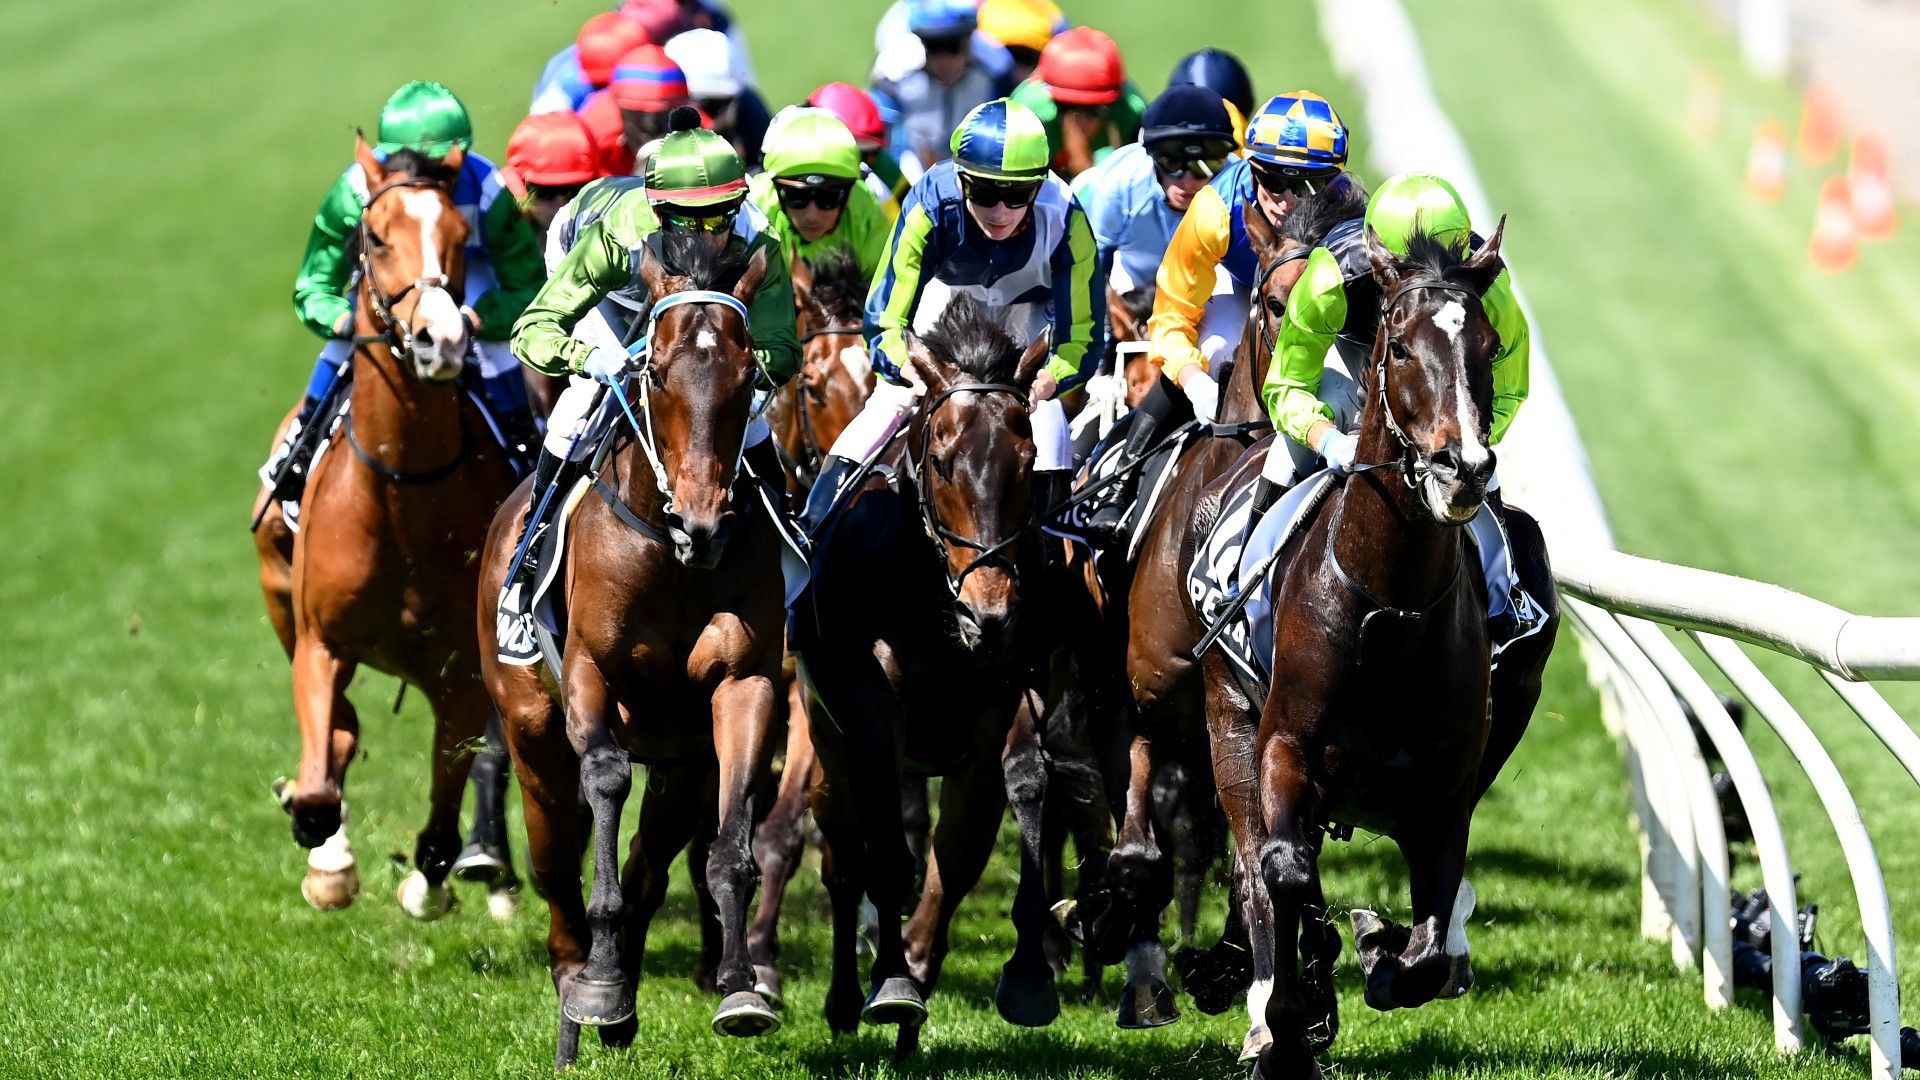 Melbourne Cup full finishing order: Where your horse finished in 2021 race